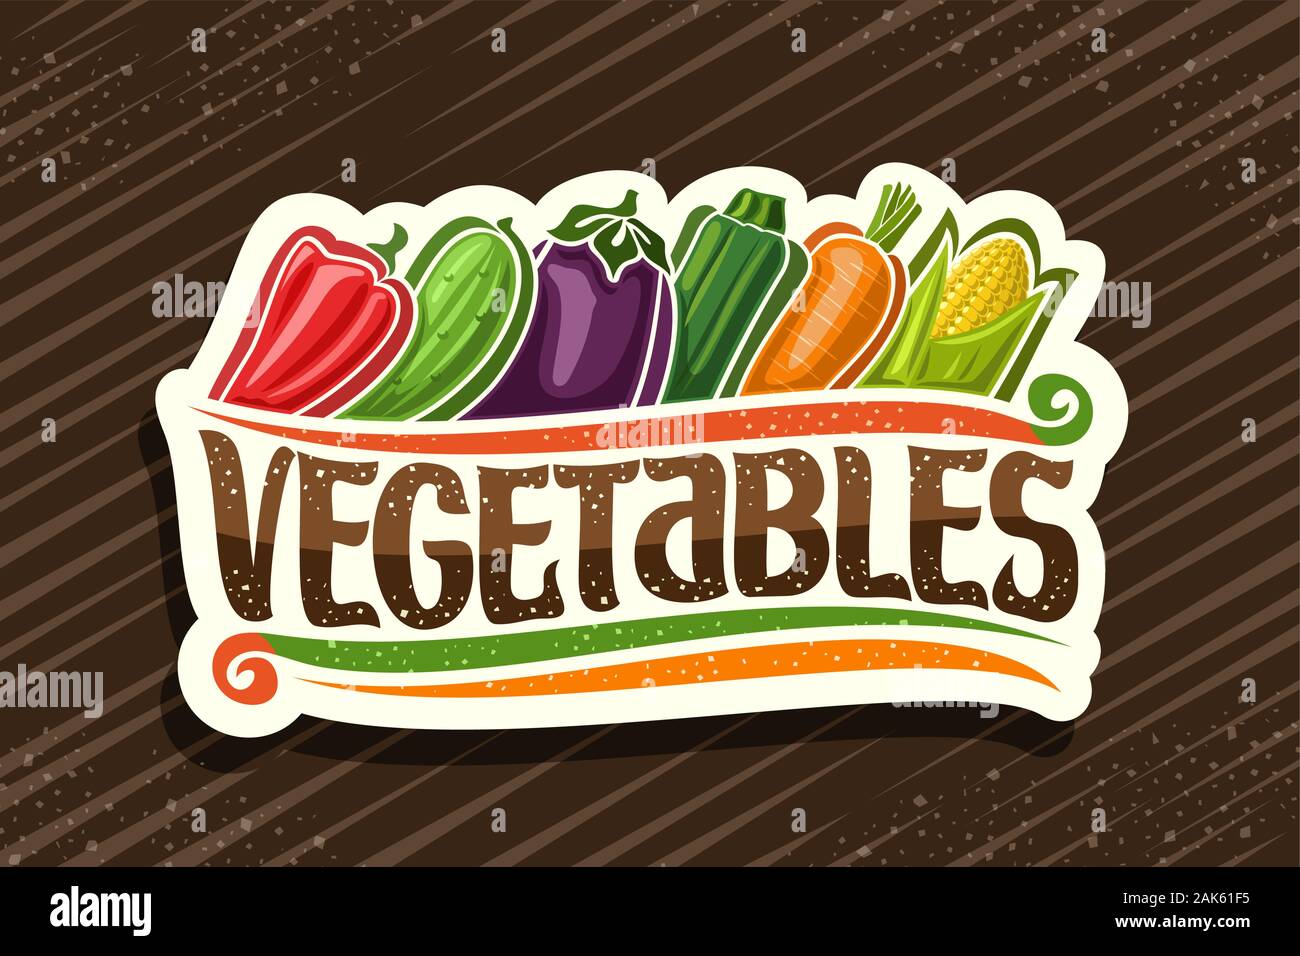 Vector logo for Fresh Vegetables, cut paper tag with illustration of cartoon raw veggies in a row, decorative signage with original type for word vege Stock Vector